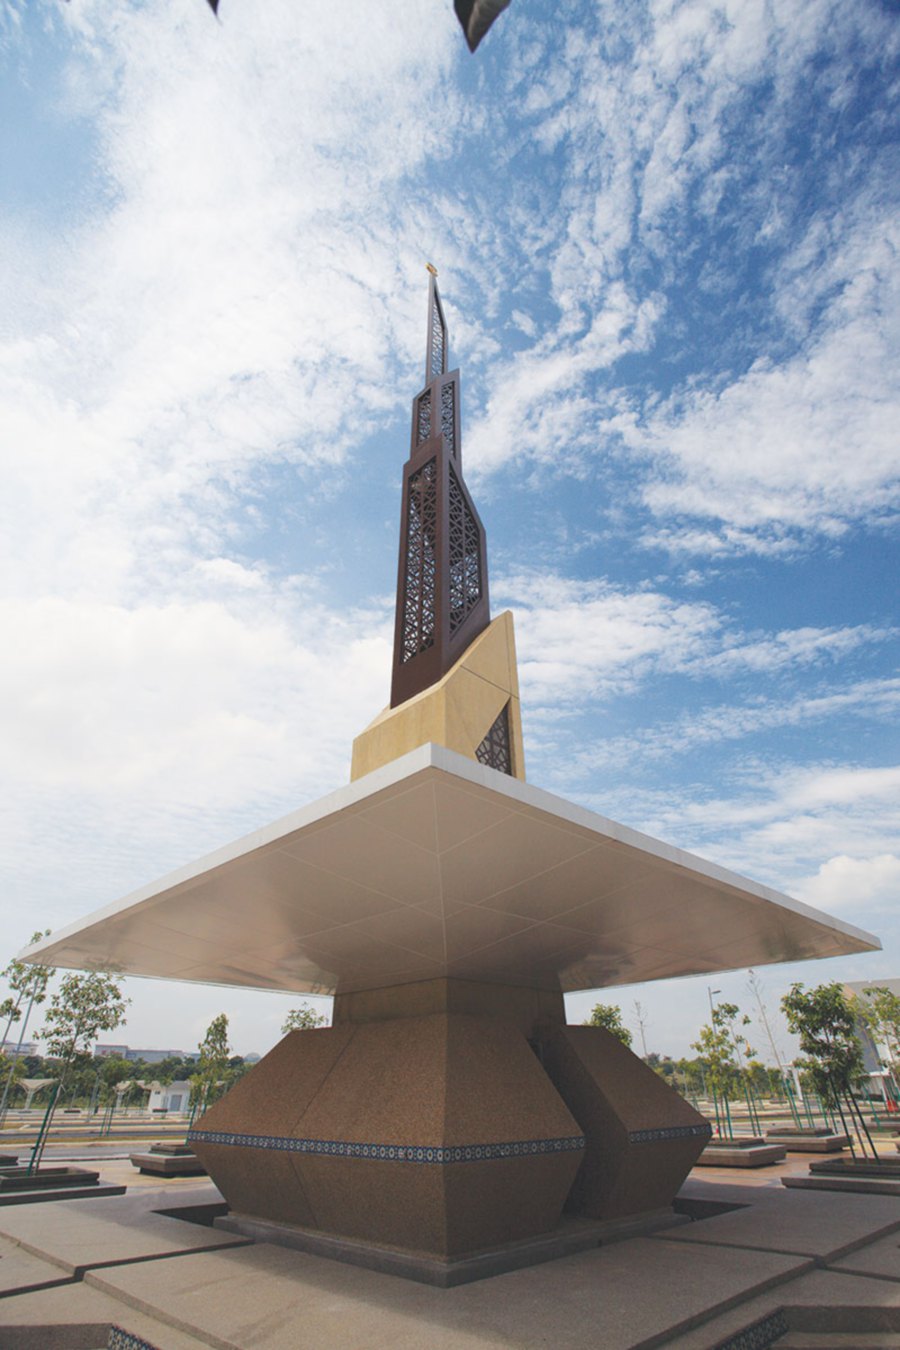  The minaret which sits in the Islamic garden was built to represent a Malay keris.